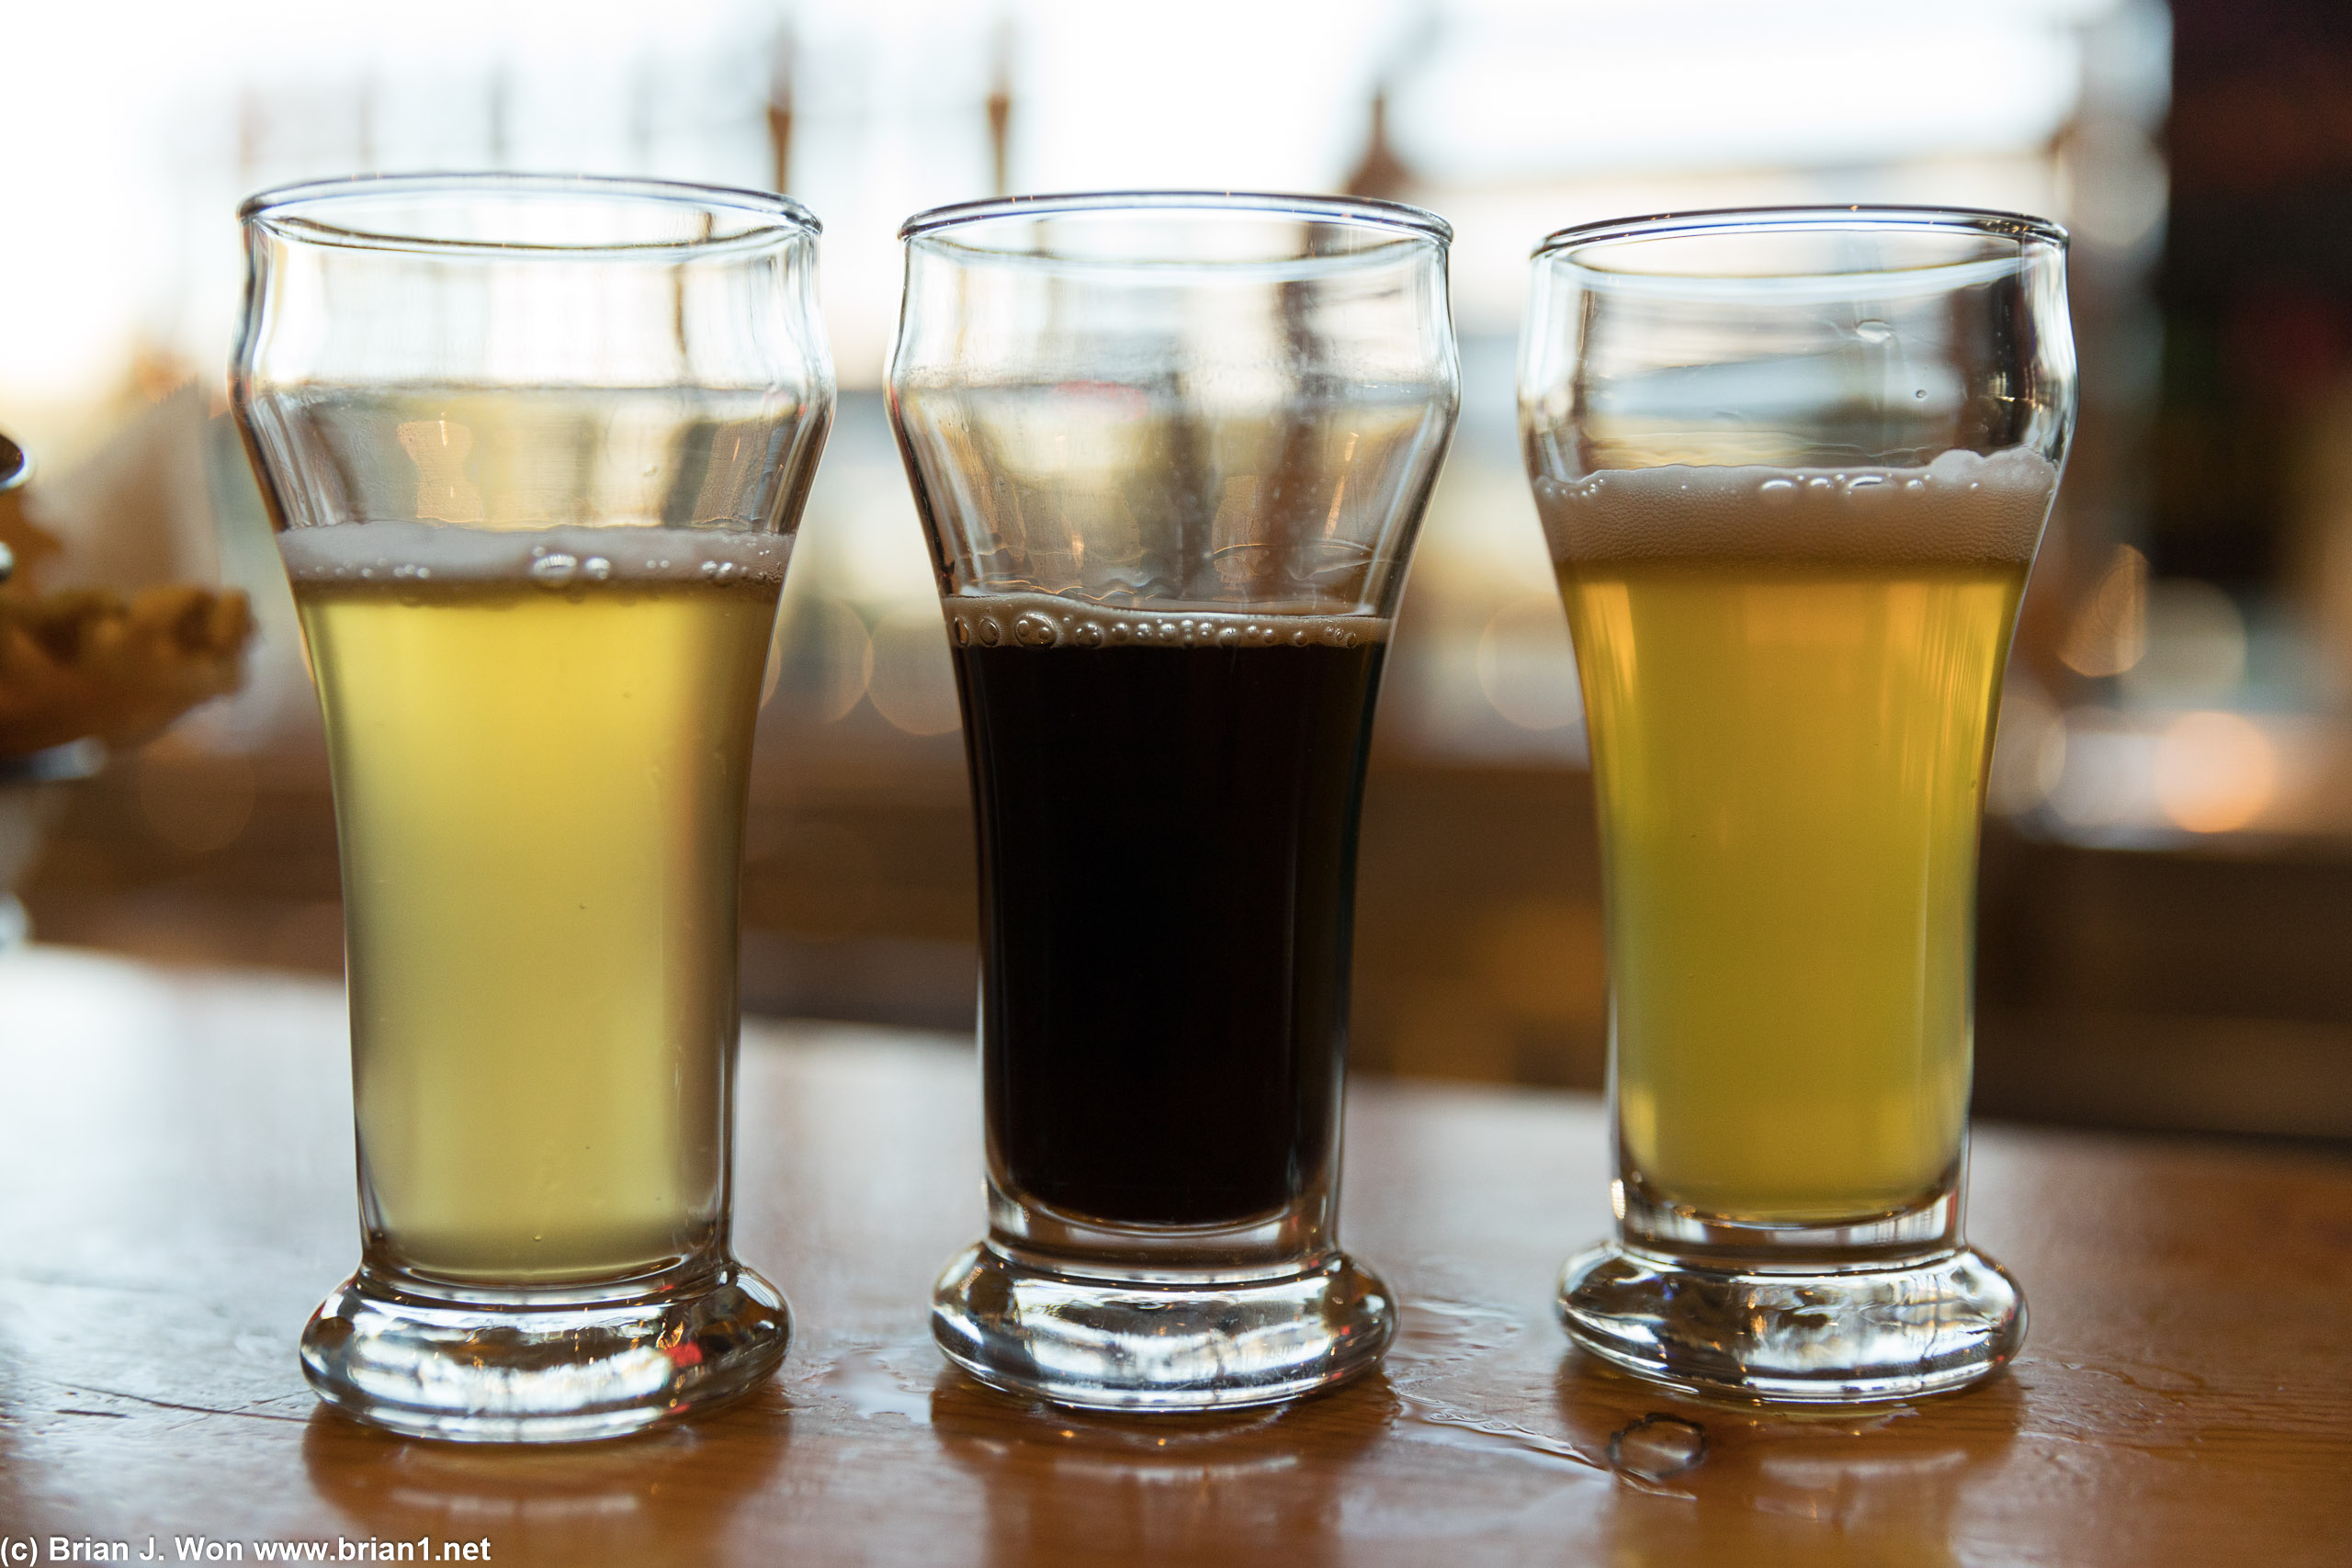 Beer. BRB Dark Sour in the middle, flanked by Mexican Lager and Juicy IPA.